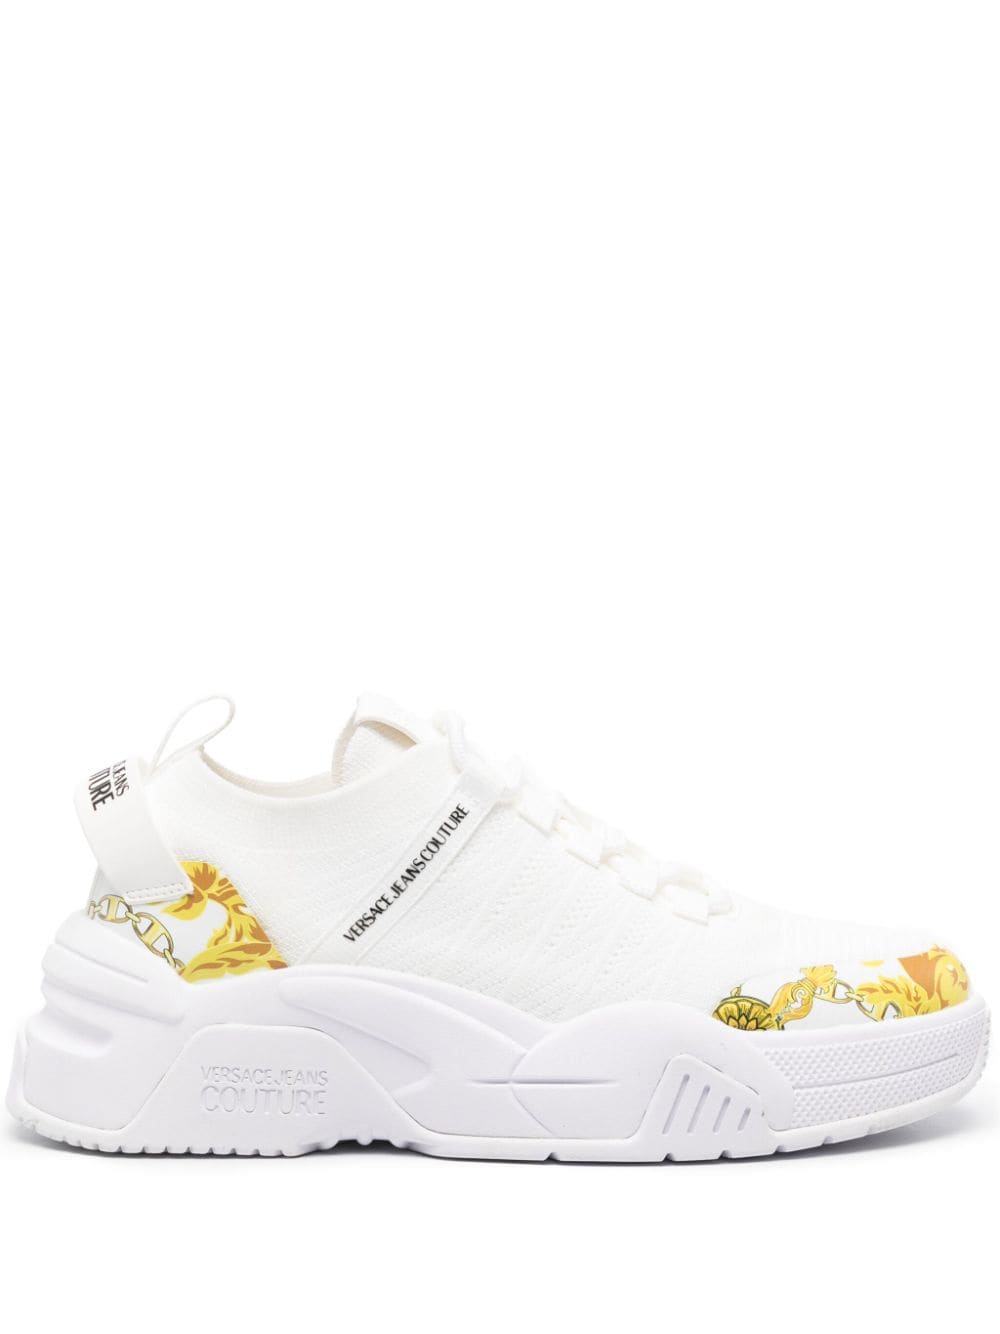 Versace Jeans Couture baroque-print leather sneakers - White von Versace Jeans Couture